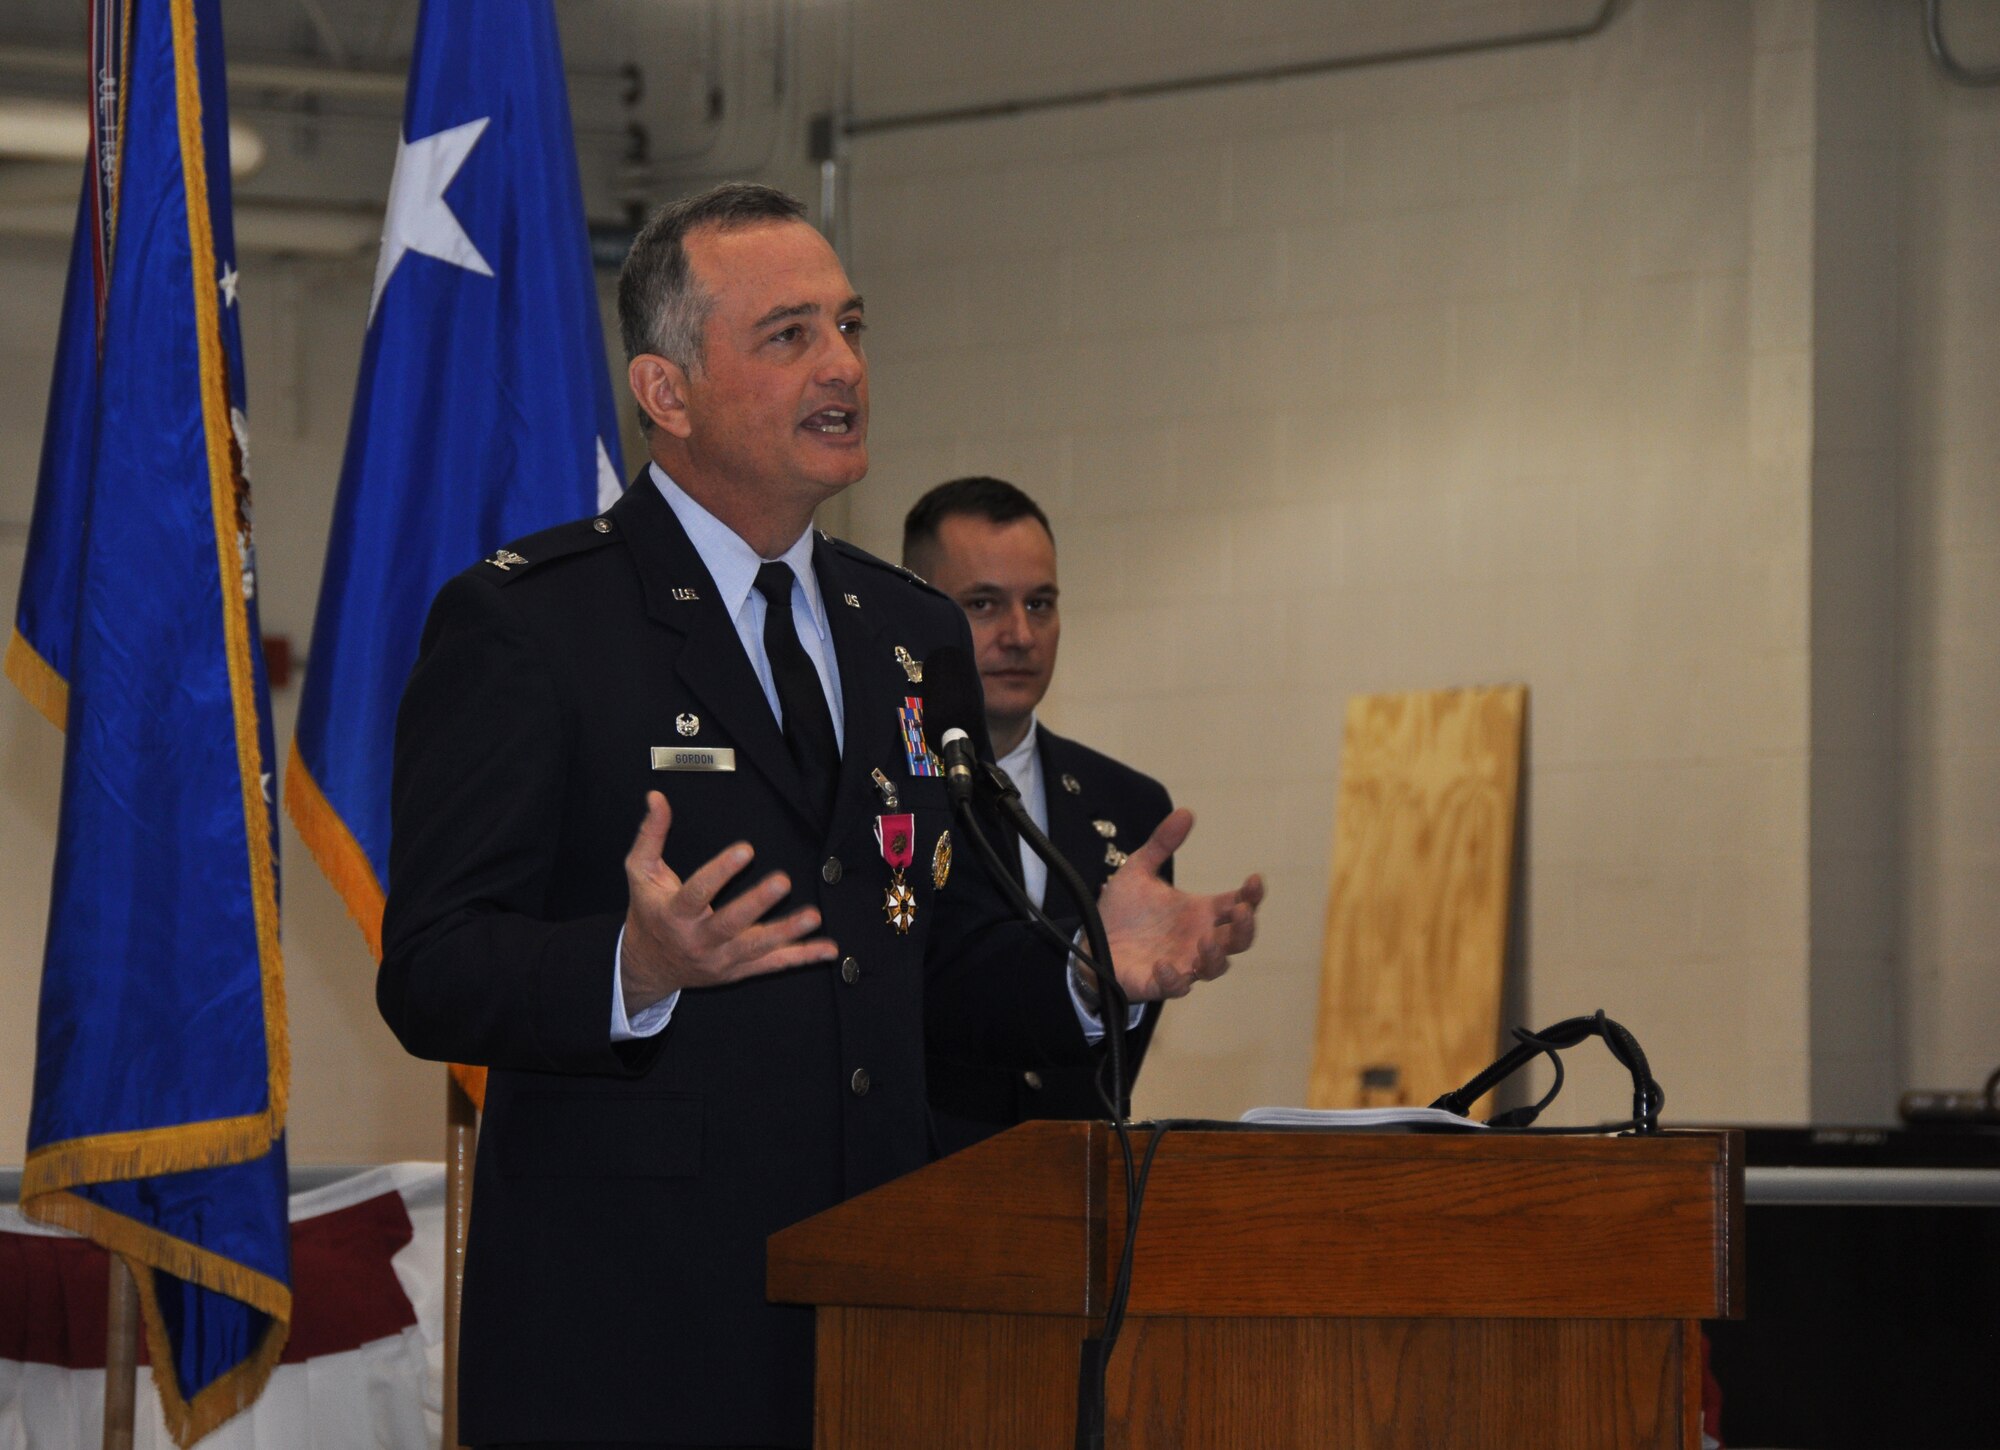 Colonel Walter O. Gordon addresses members of the 914th Airlift Wing upon relinquishing command, March 1, 2014. (U.S. Air Force photo by Staff Sgt. Stephanie Clark)  